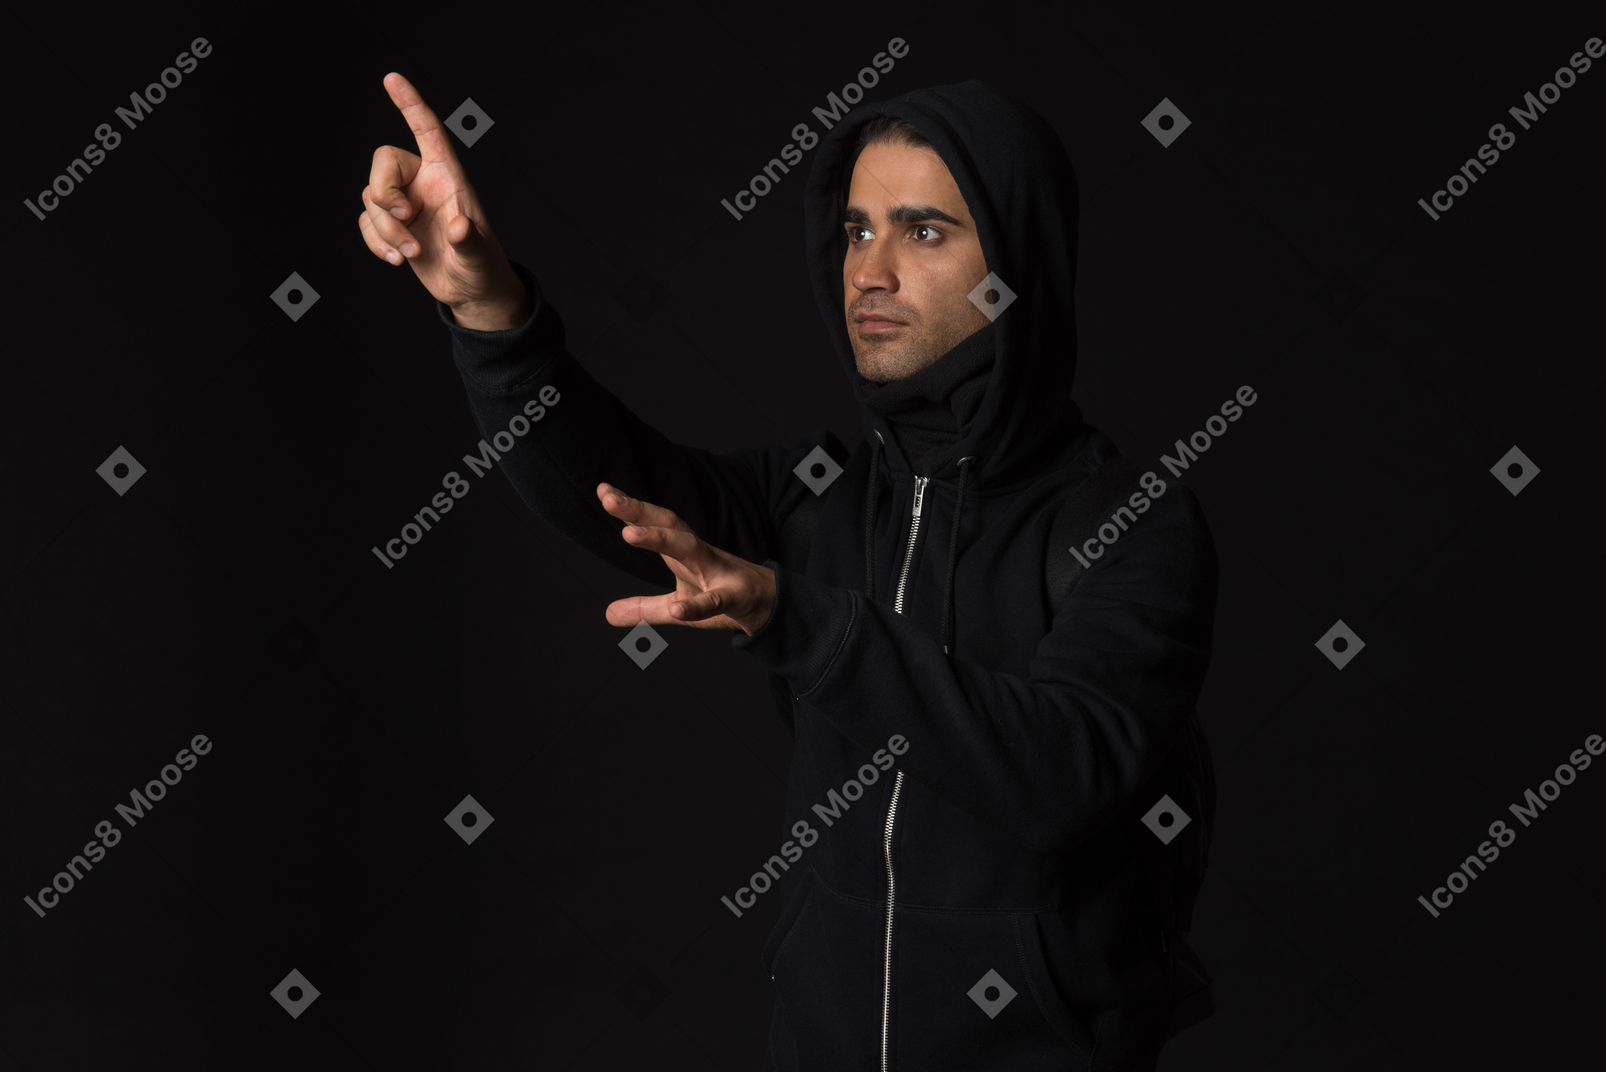 Hacker guy standing in the dark and like touching something with hands